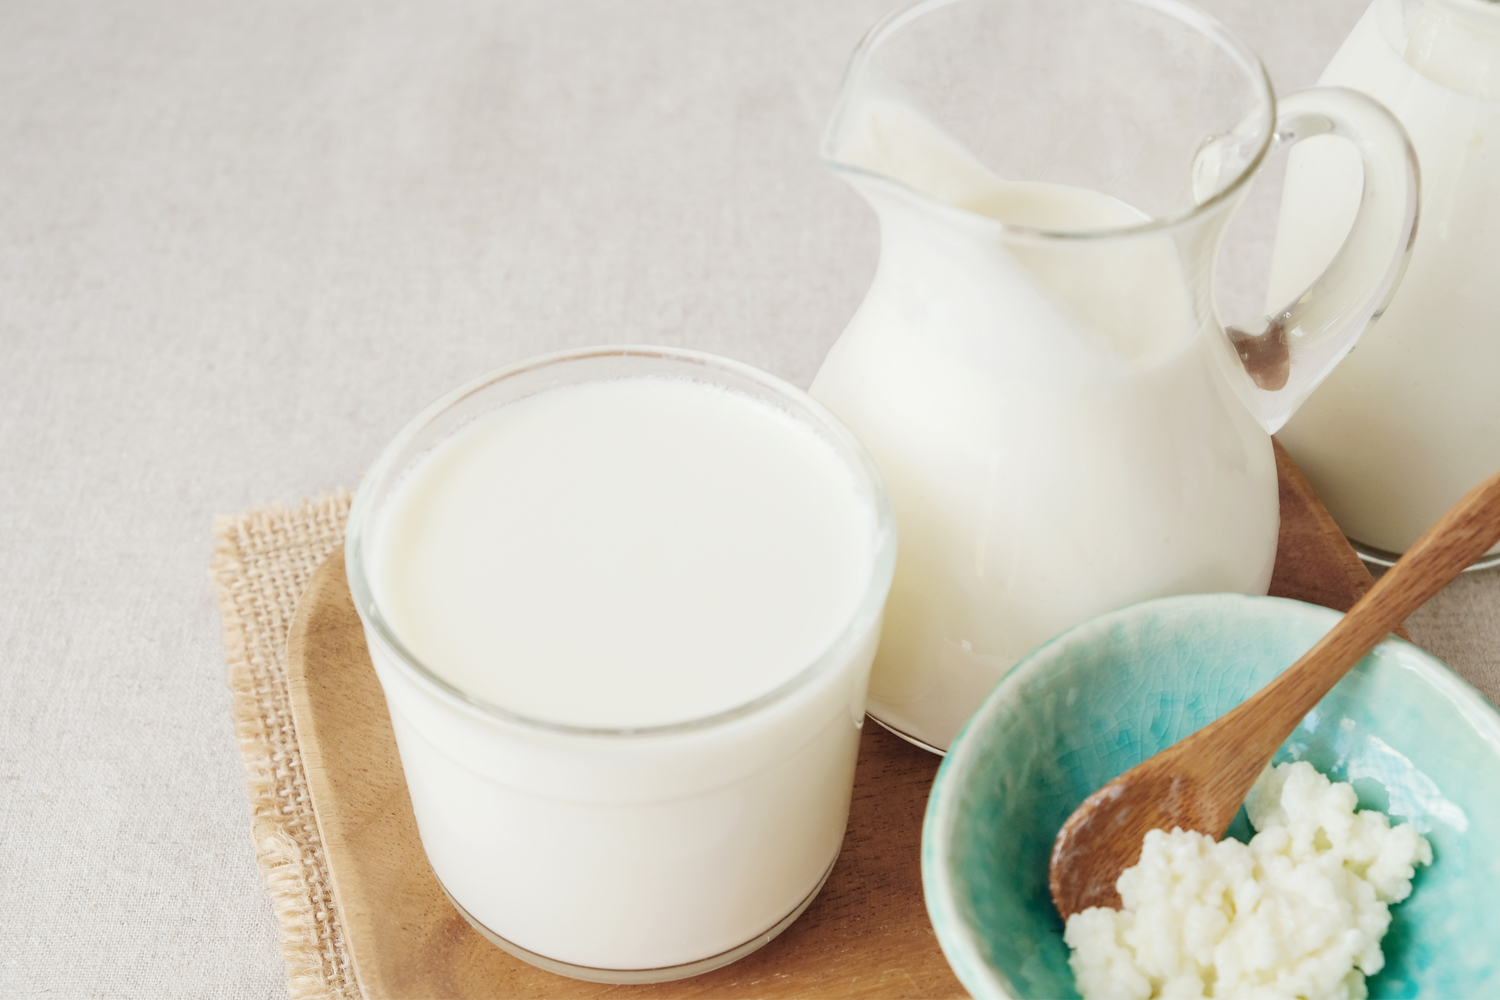 What Is Kefir, and What Are Its Health Benefits?